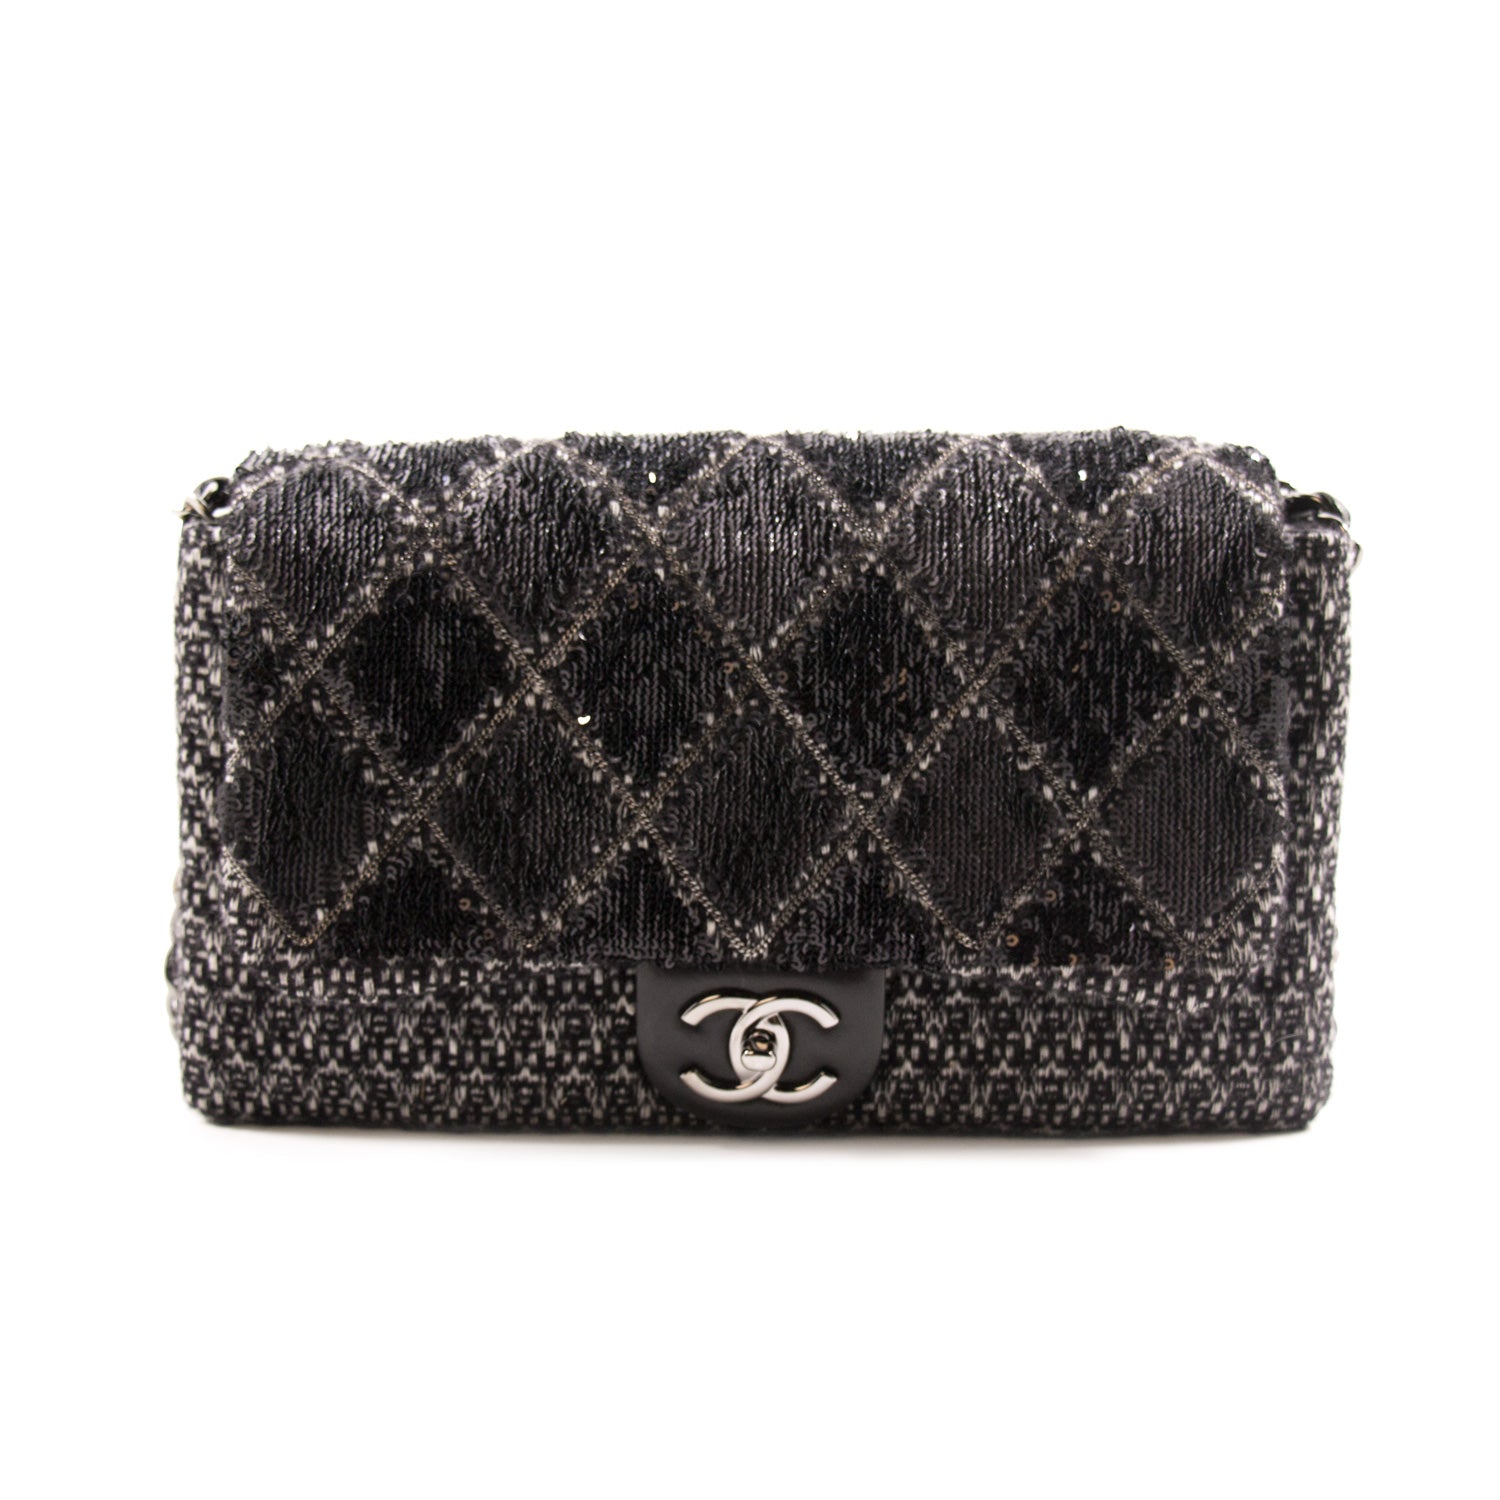 Shop authentic Chanel Sequin Tweed Flap Bag at revogue for just